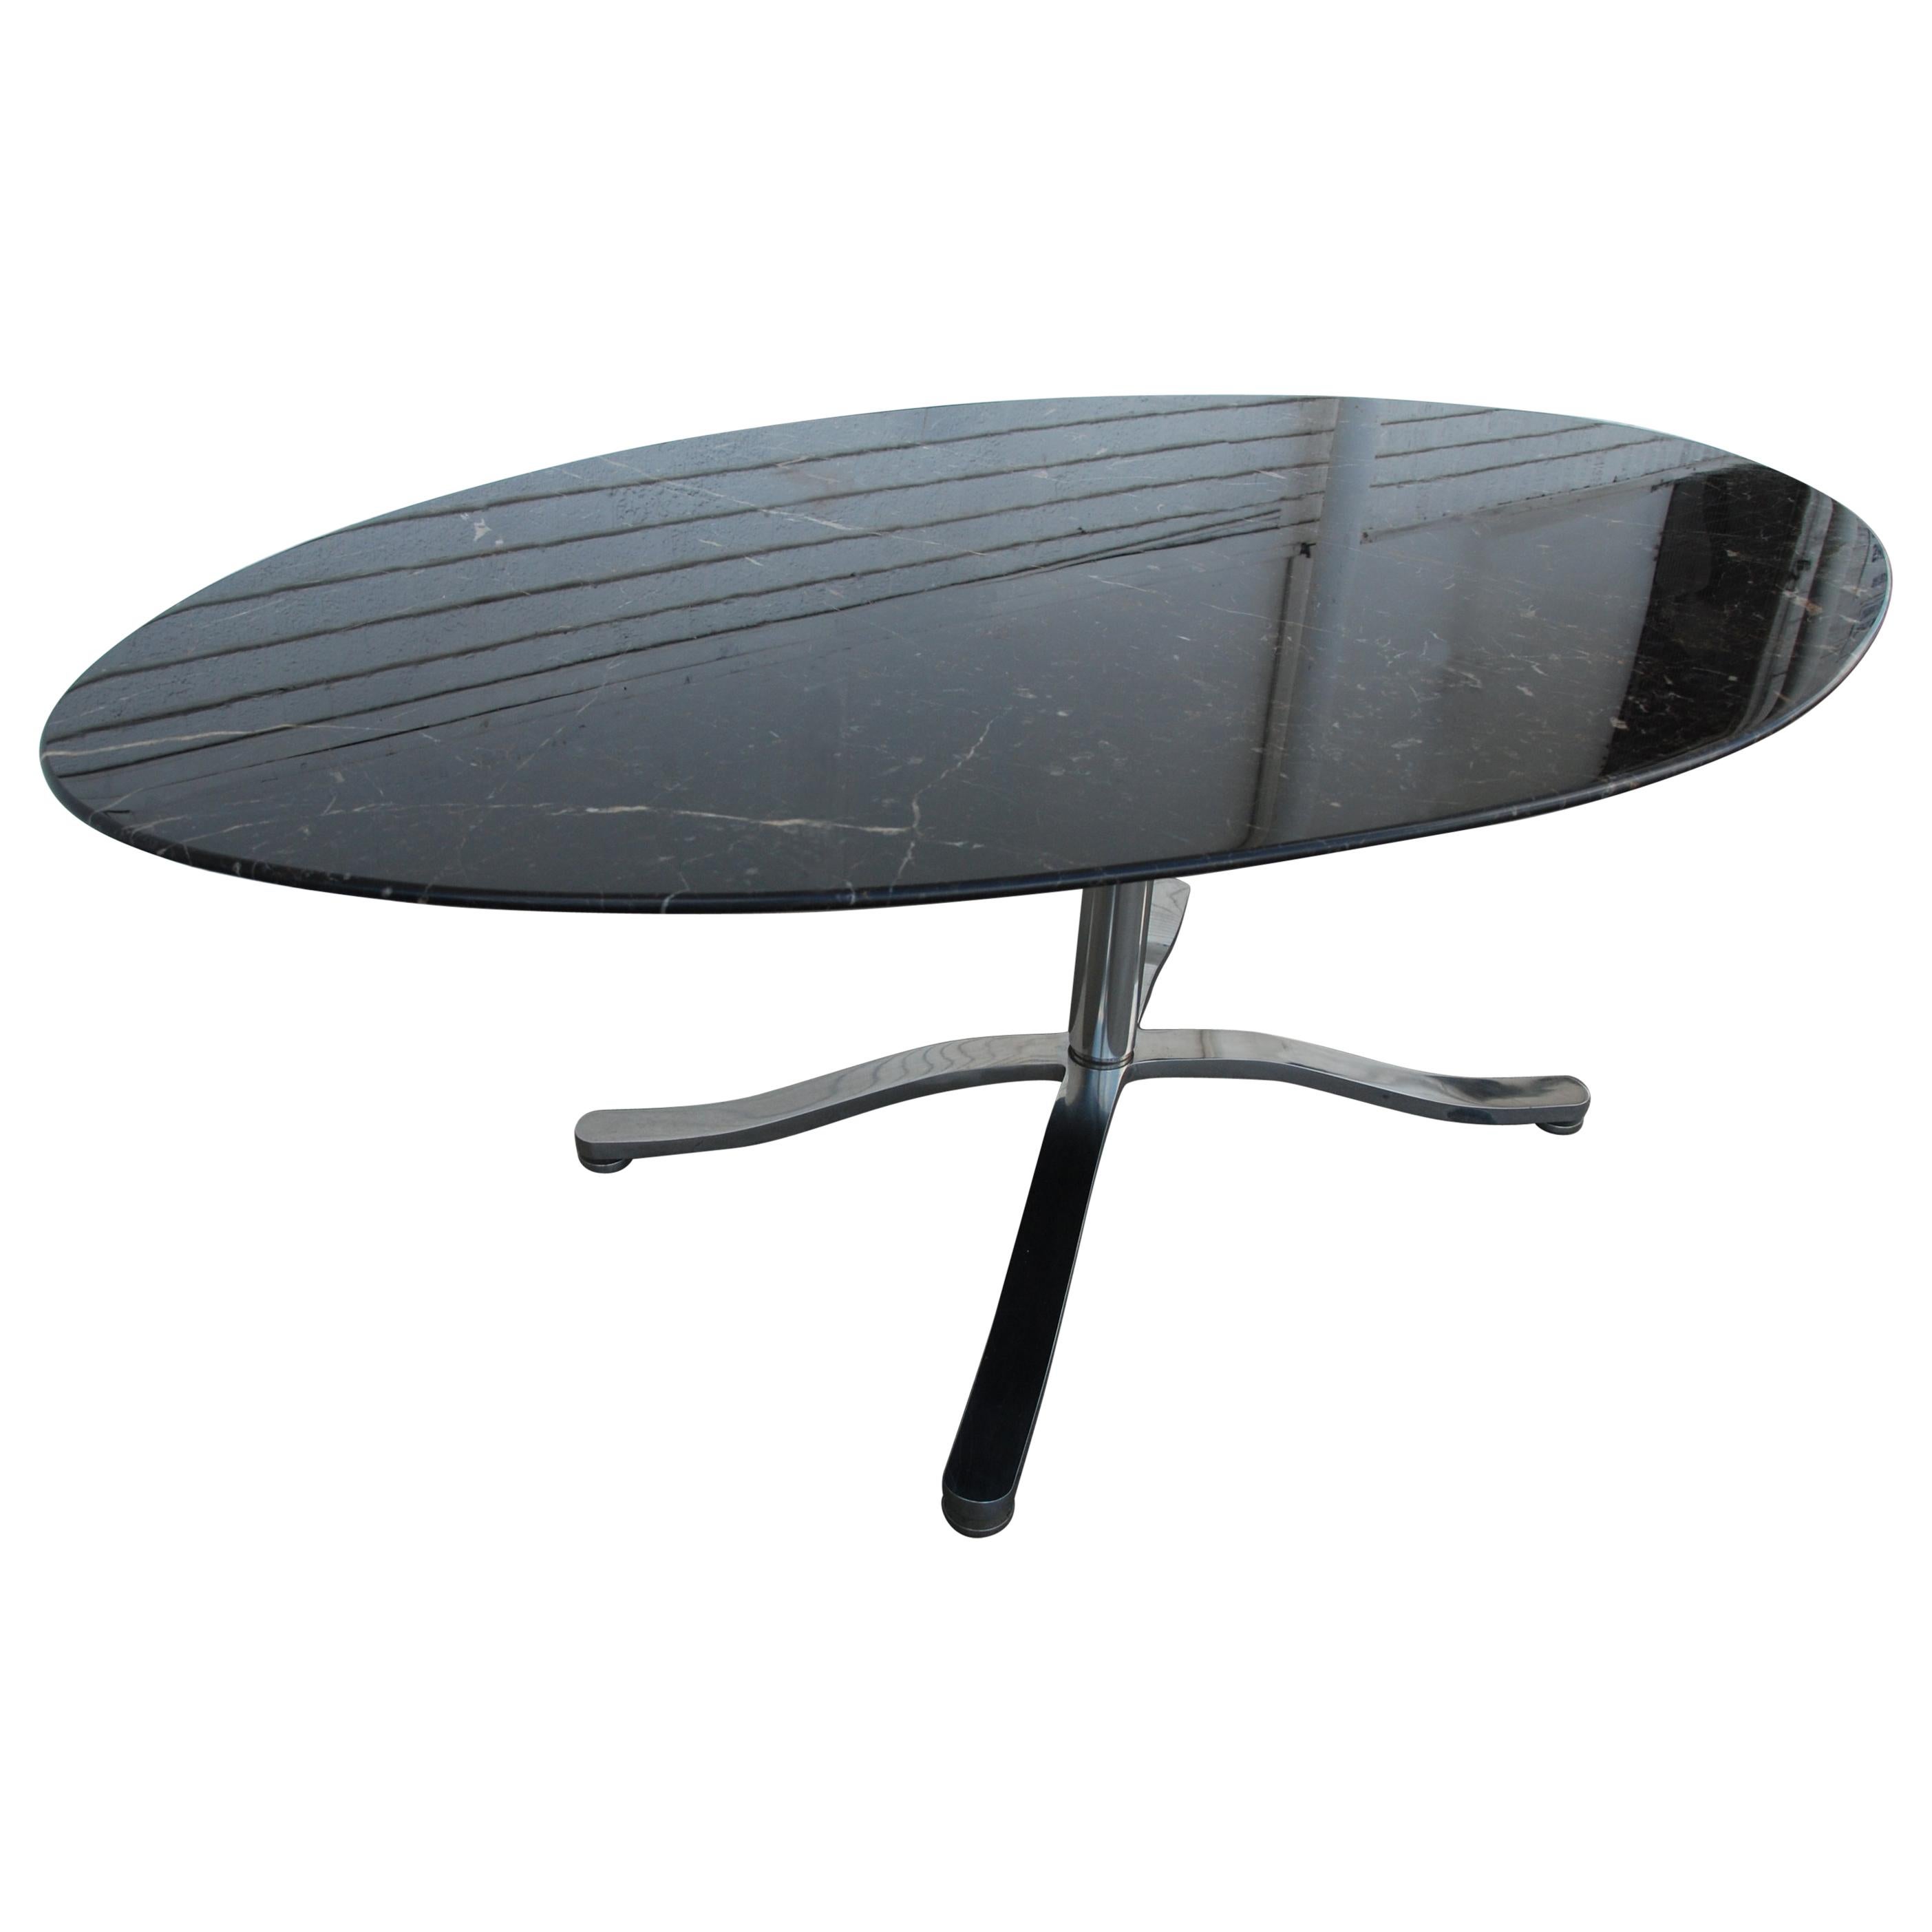 78" Oval  Zographos Black Marquina Marble Stainless Steel Dining Table